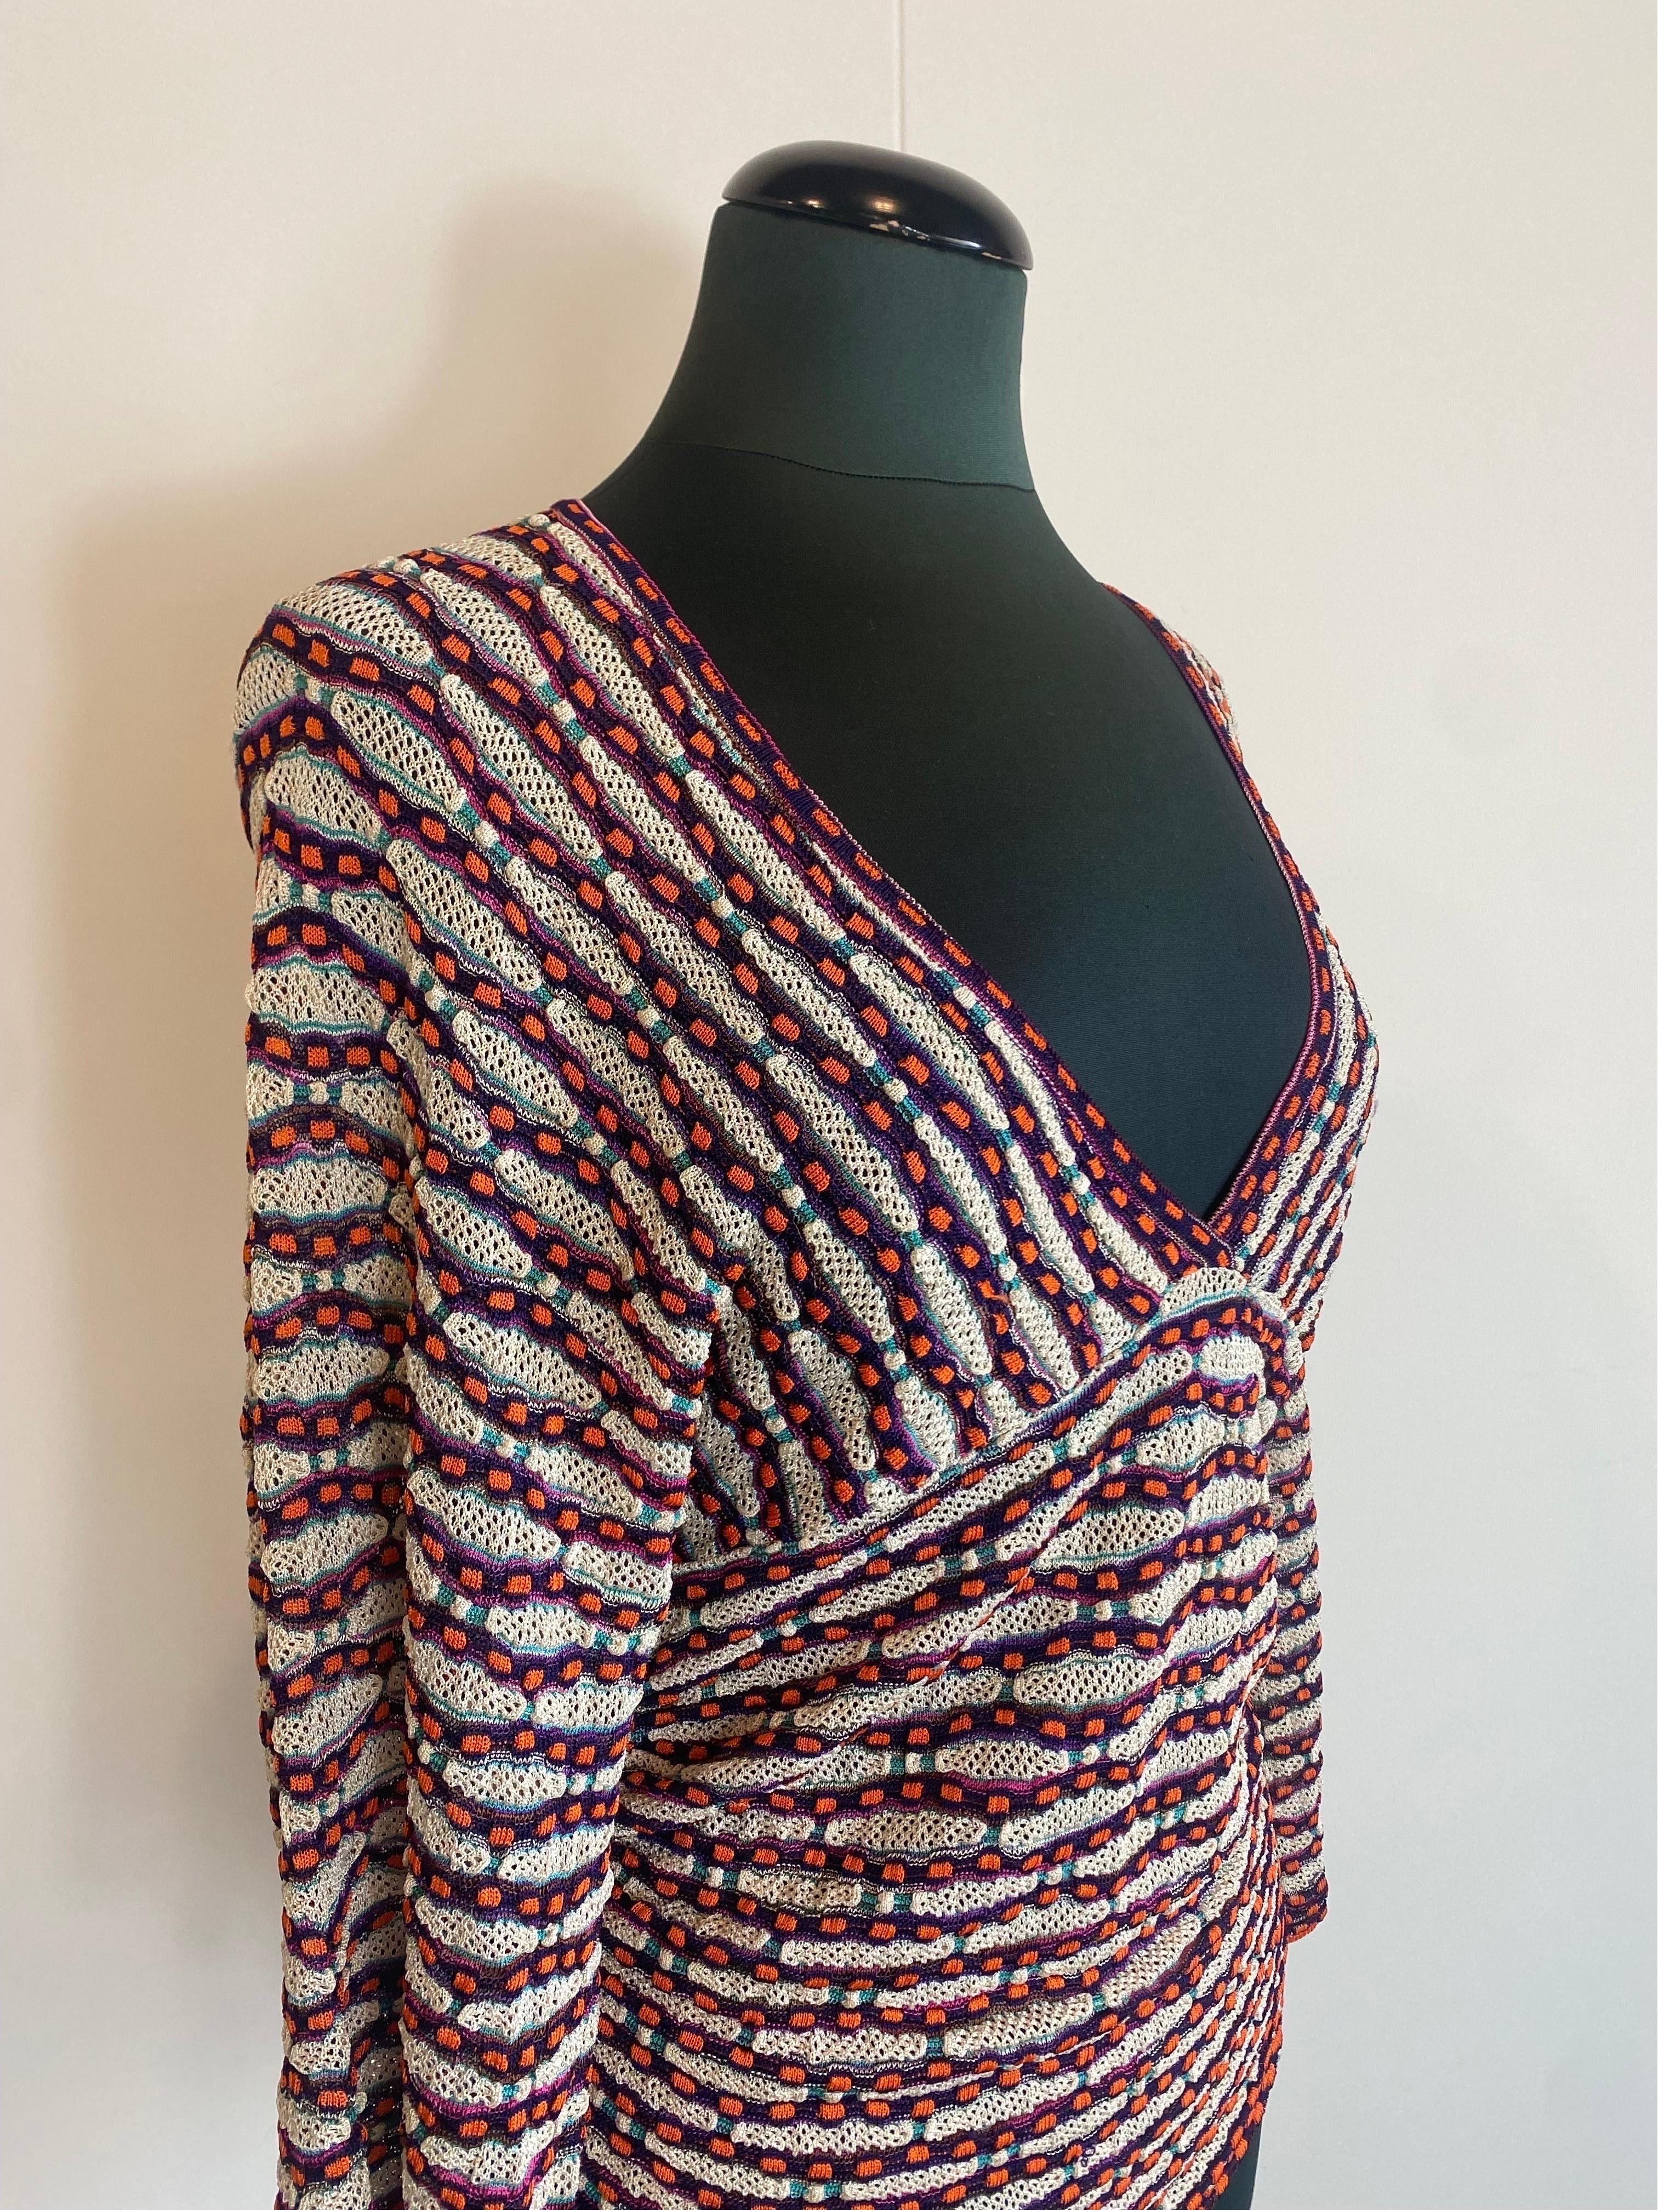 Missoni crochet blouse
In rayon and nylon.
V-neck. Orange, purple and light blue tones.
Wide sleeves.
Side buttons as in the photo on the side and gathers on the sides.
Size 44.
Shoulder 59
Bust 40
Length 75
In excellent condition, shows signs of